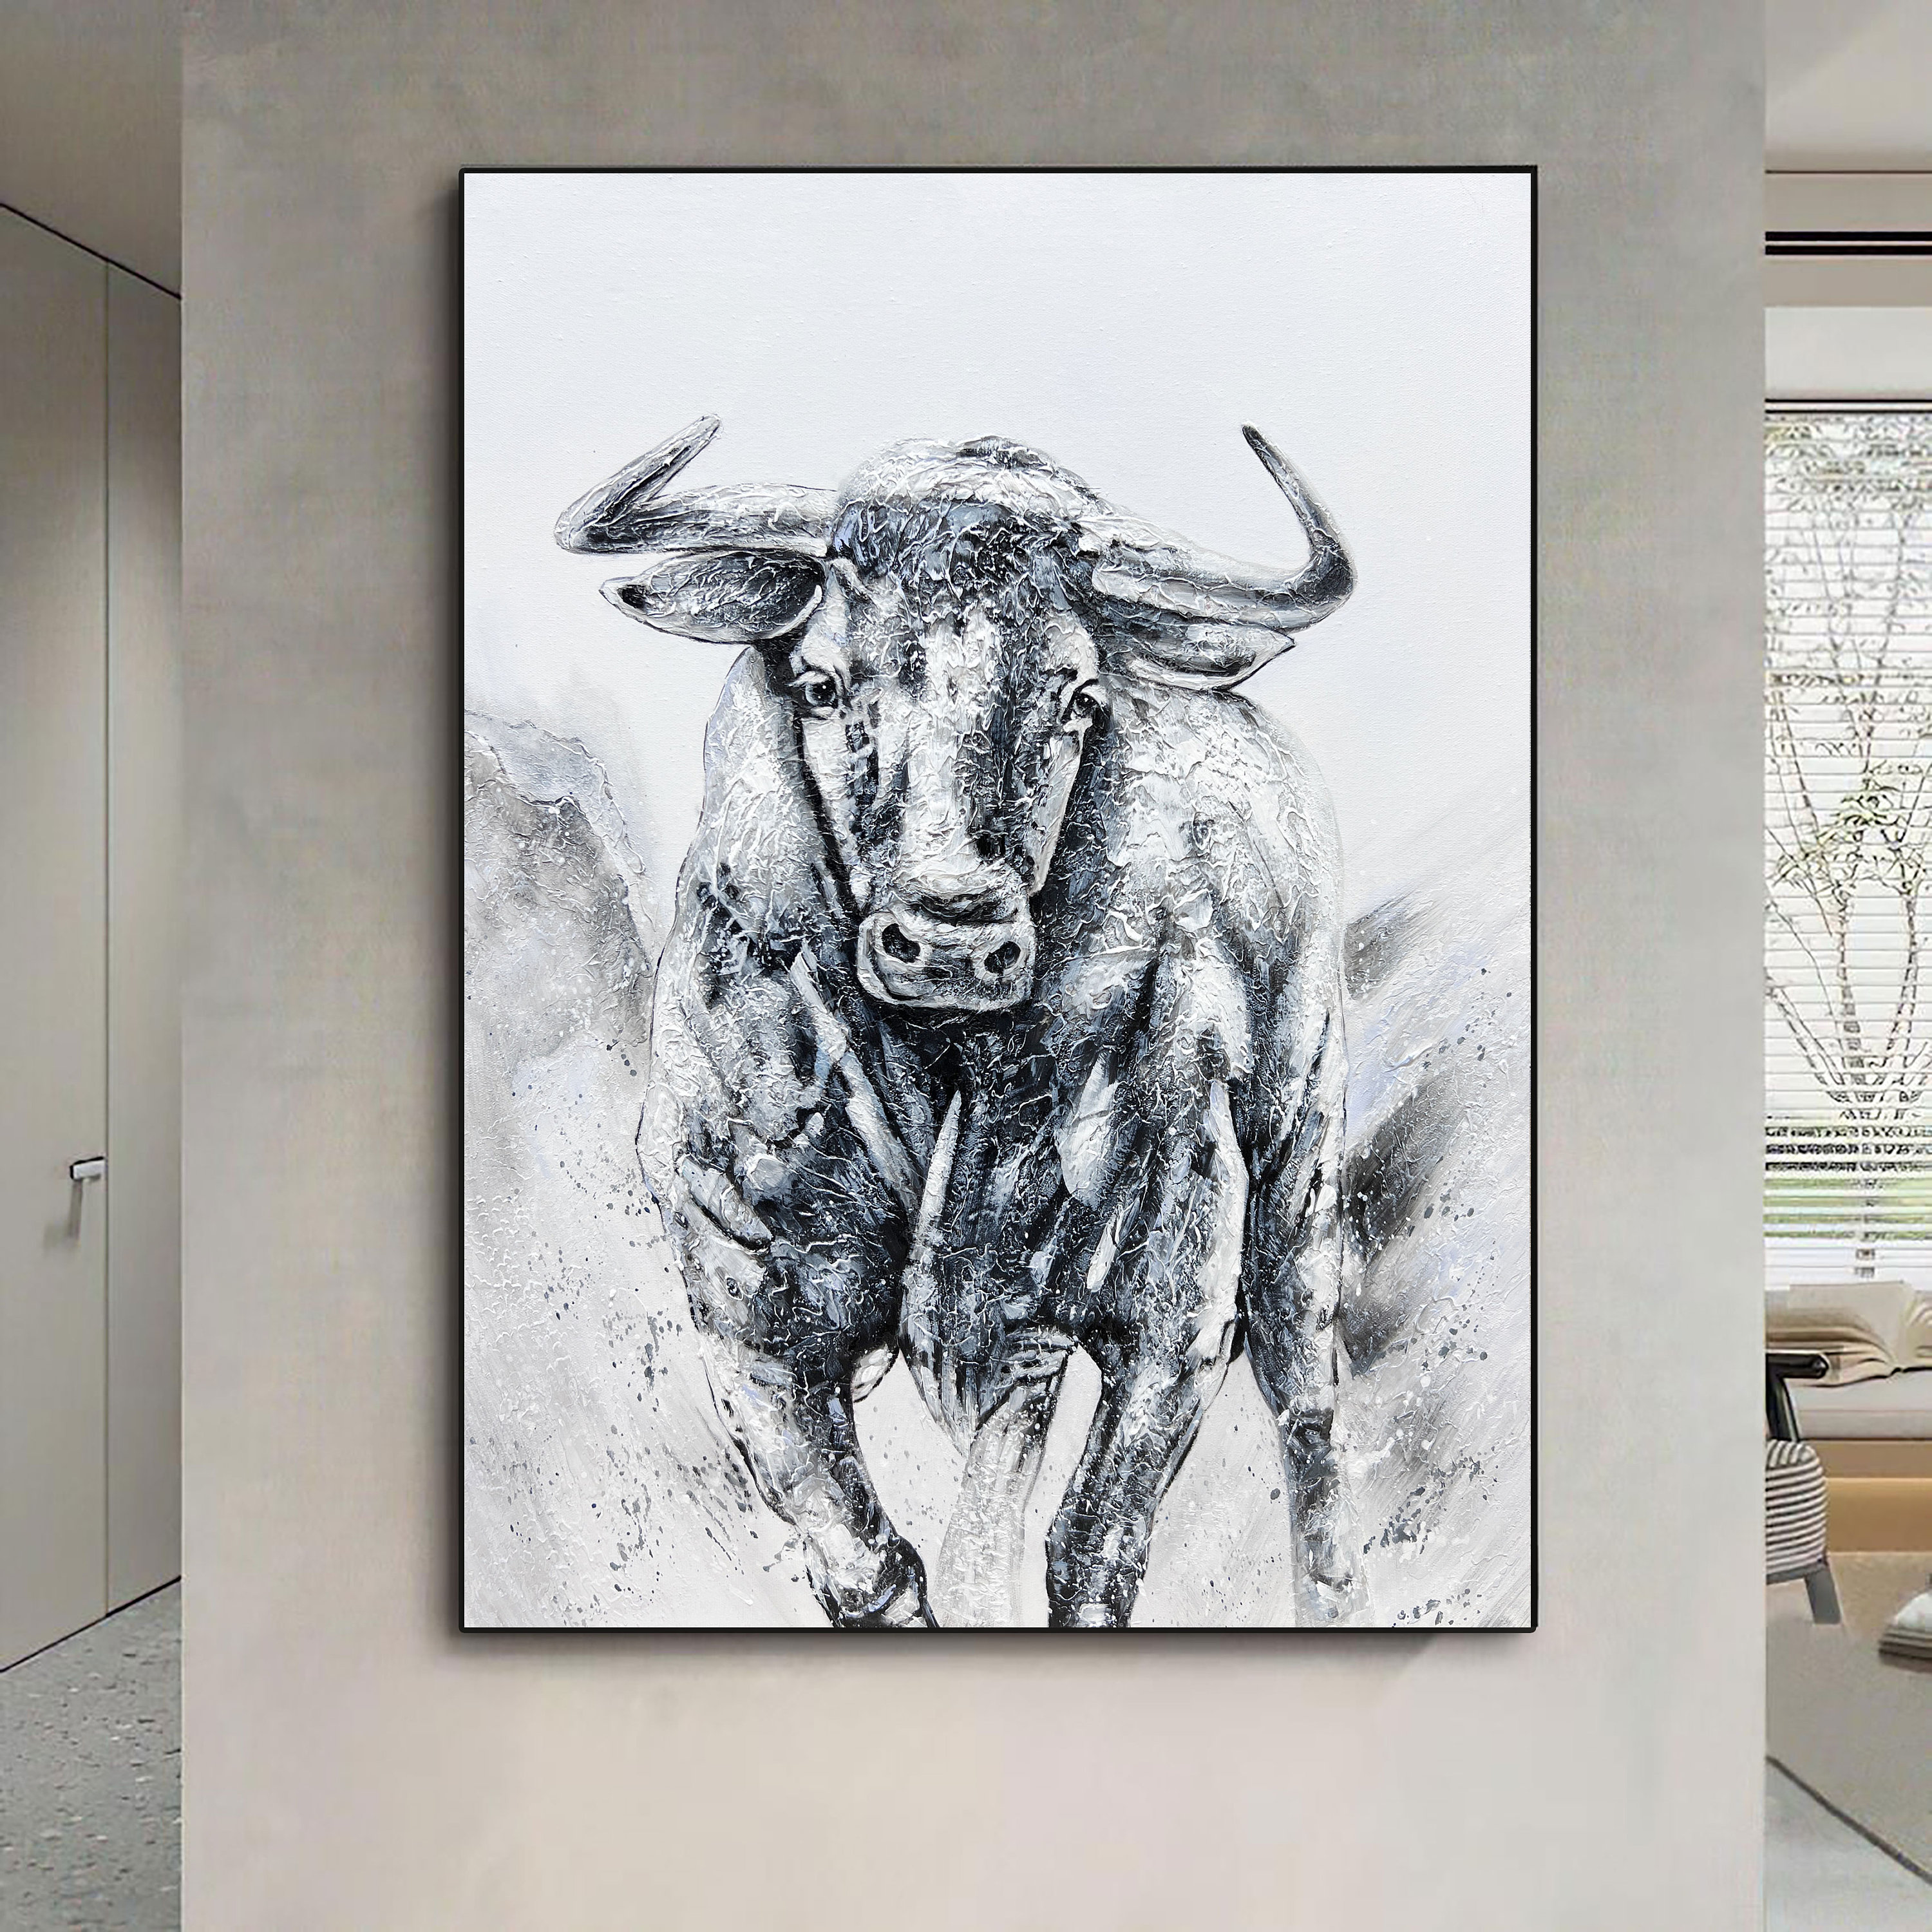 Original Bull Canvas Abstract Oil Painting Angry Bull Wall hq photo